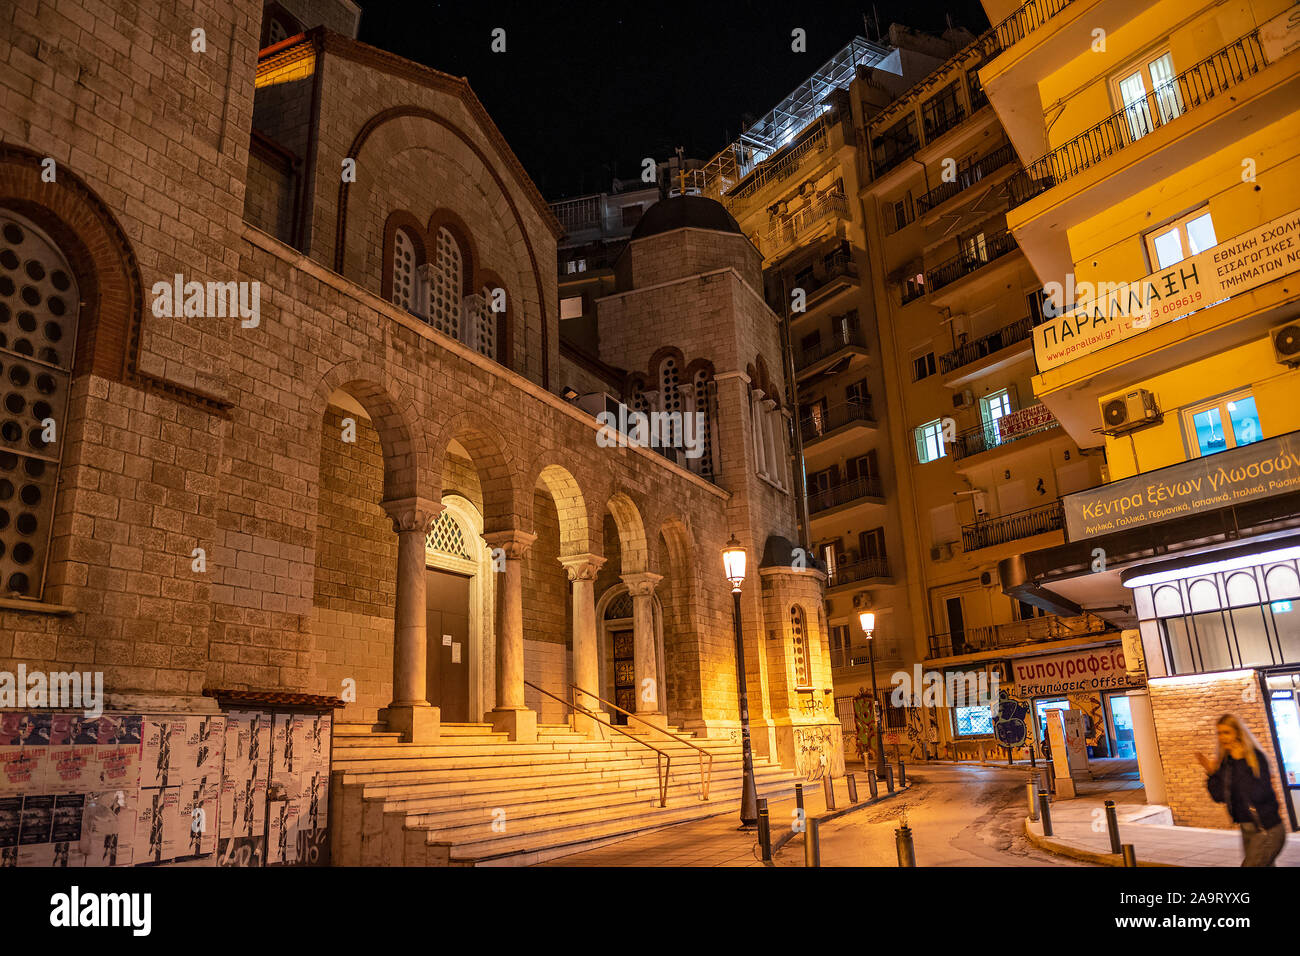 The Holy Church of Panagia Dexia in the center of Thessaloniki city, Greece illuminated at night Stock Photo